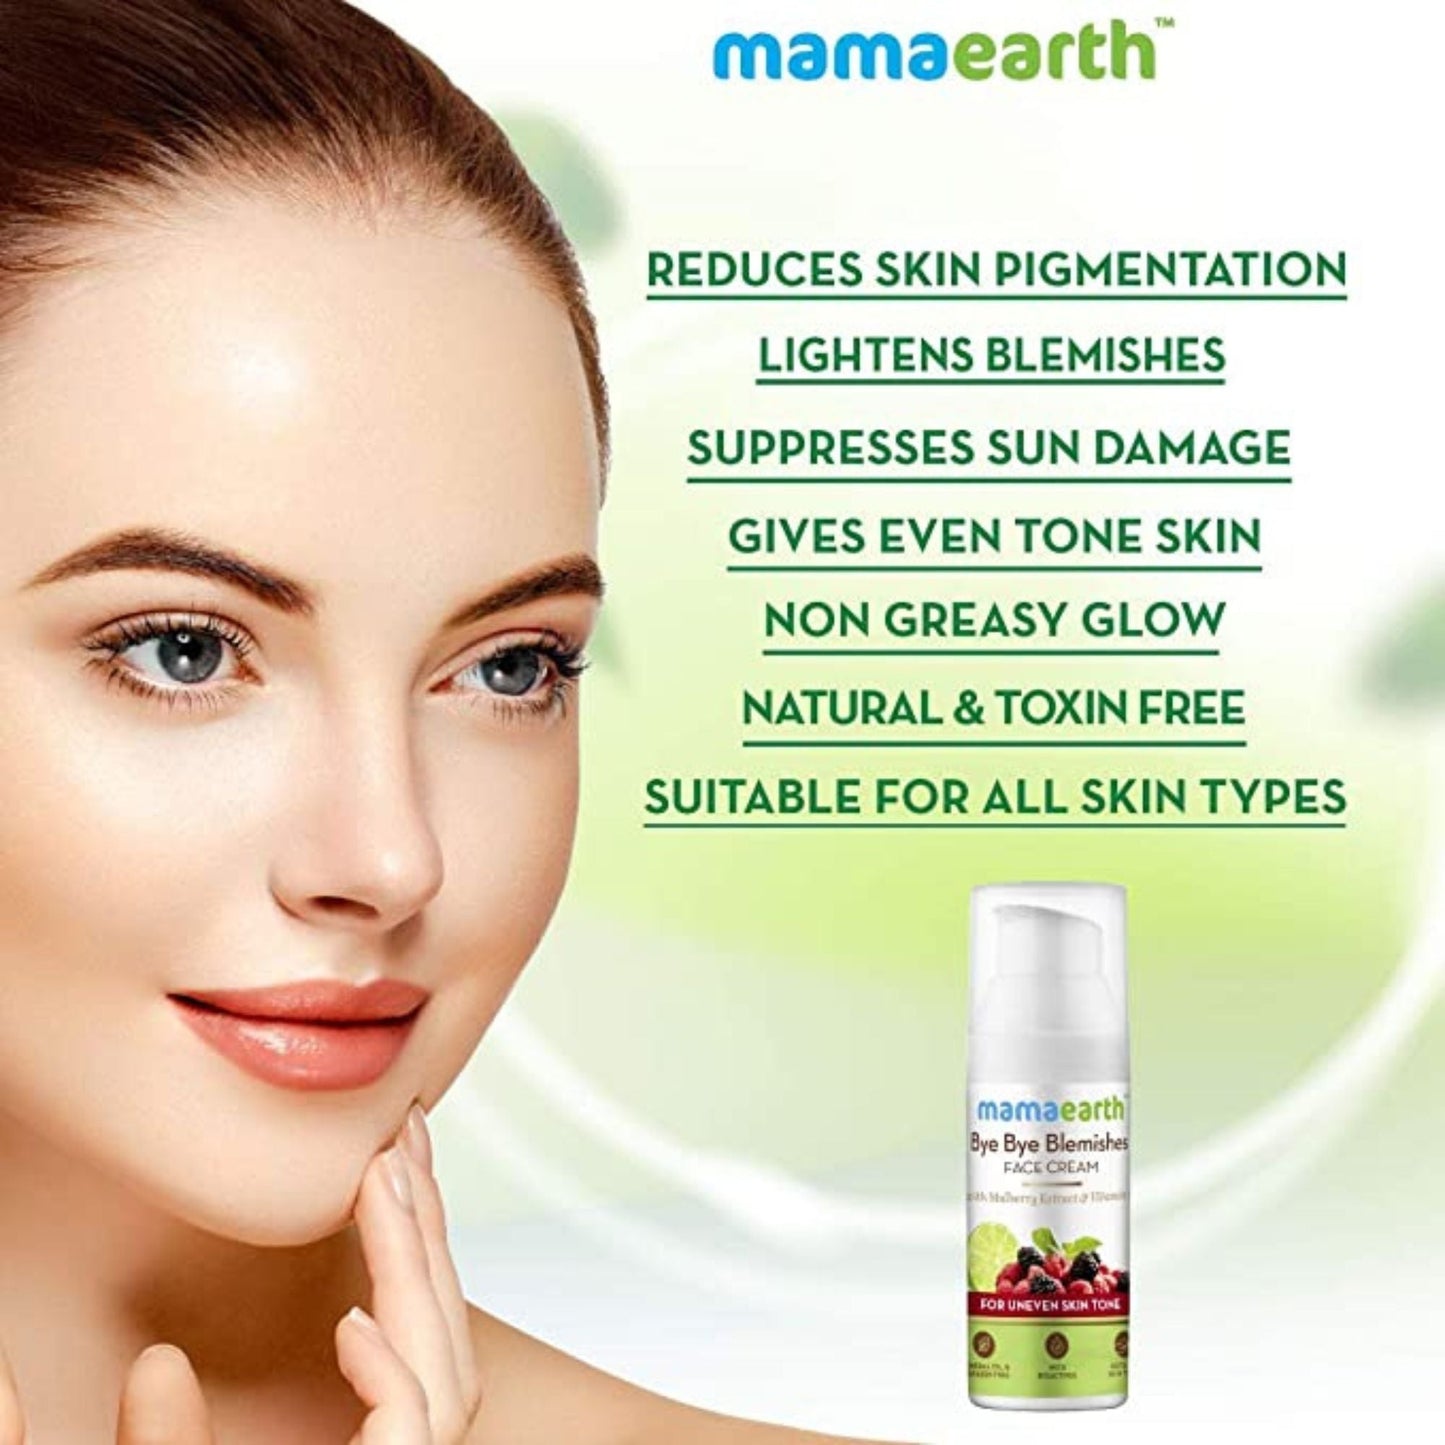 Mamaearth Bye Bye Blemishes Face Cream, For Pigmentation & Blemish Removal, With Mulberry Extract & Vitamin C